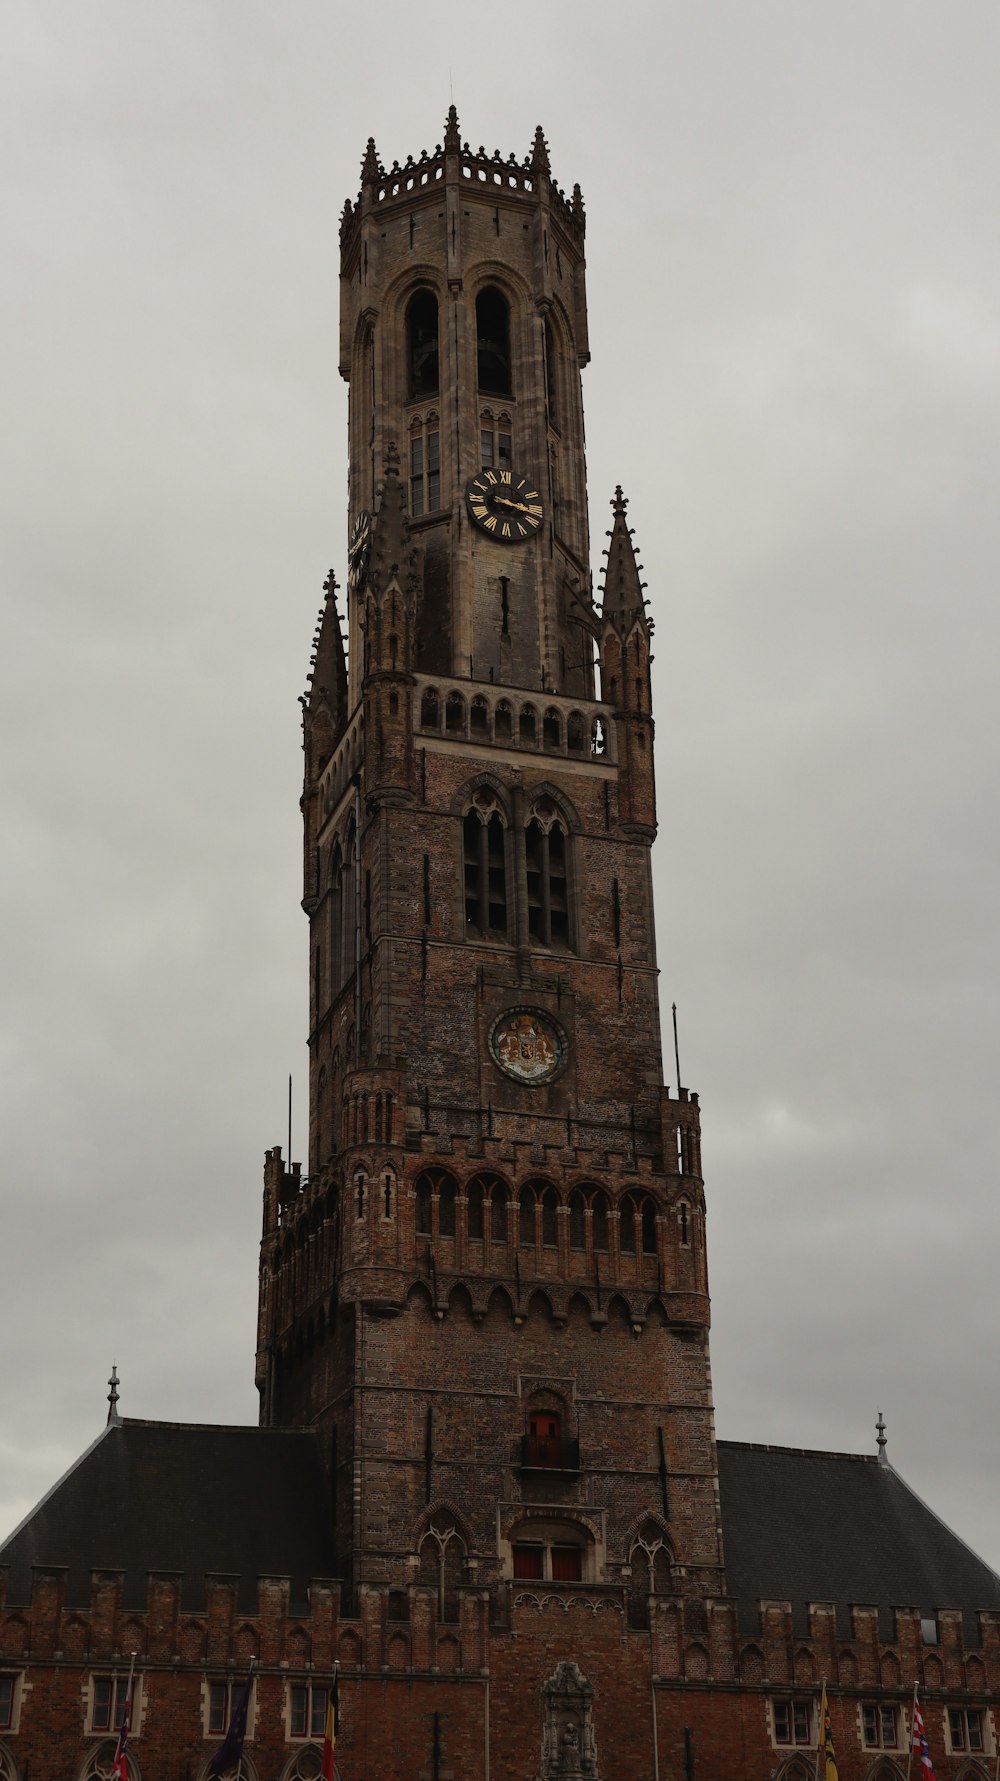 a very tall tower with a clock on it